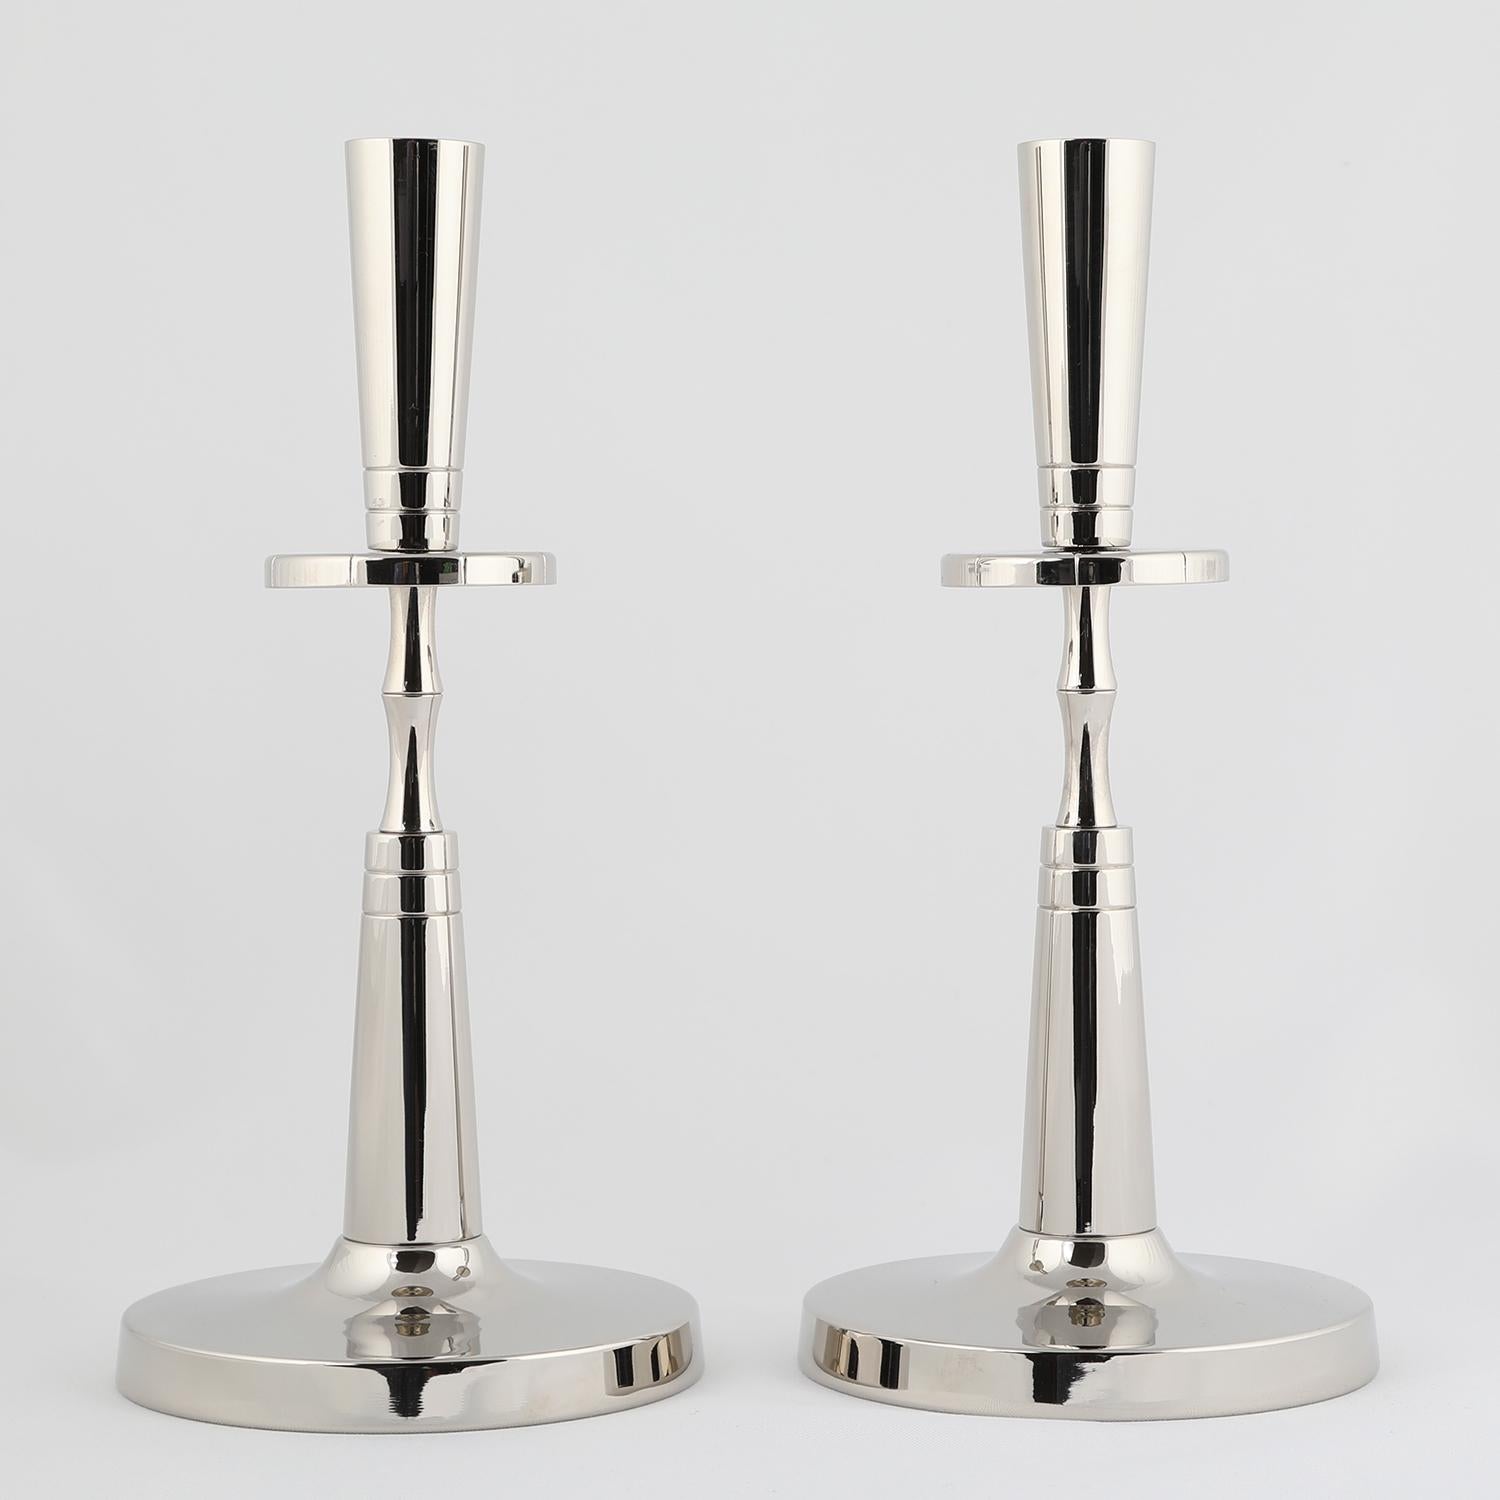 Pair of elegant candelabra in polished nickel, each holding 1 candle, each engraved with radiating lines, by Tommi Parzinger for Mueck-Cary, American 1950’s (signed on bottom “Mueck-Cary”).